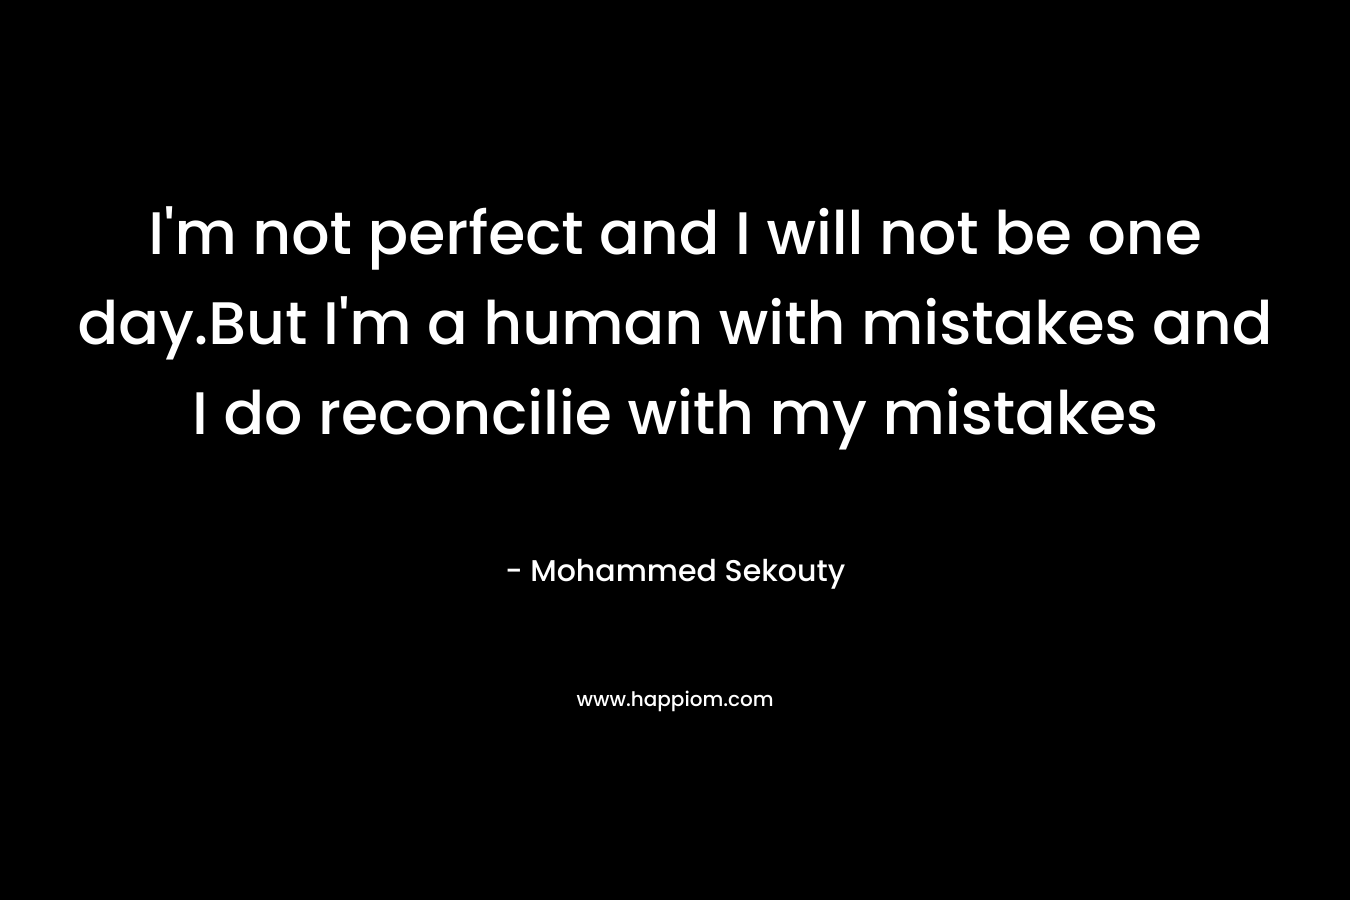 I'm not perfect and I will not be one day.But I'm a human with mistakes and I do reconcilie with my mistakes